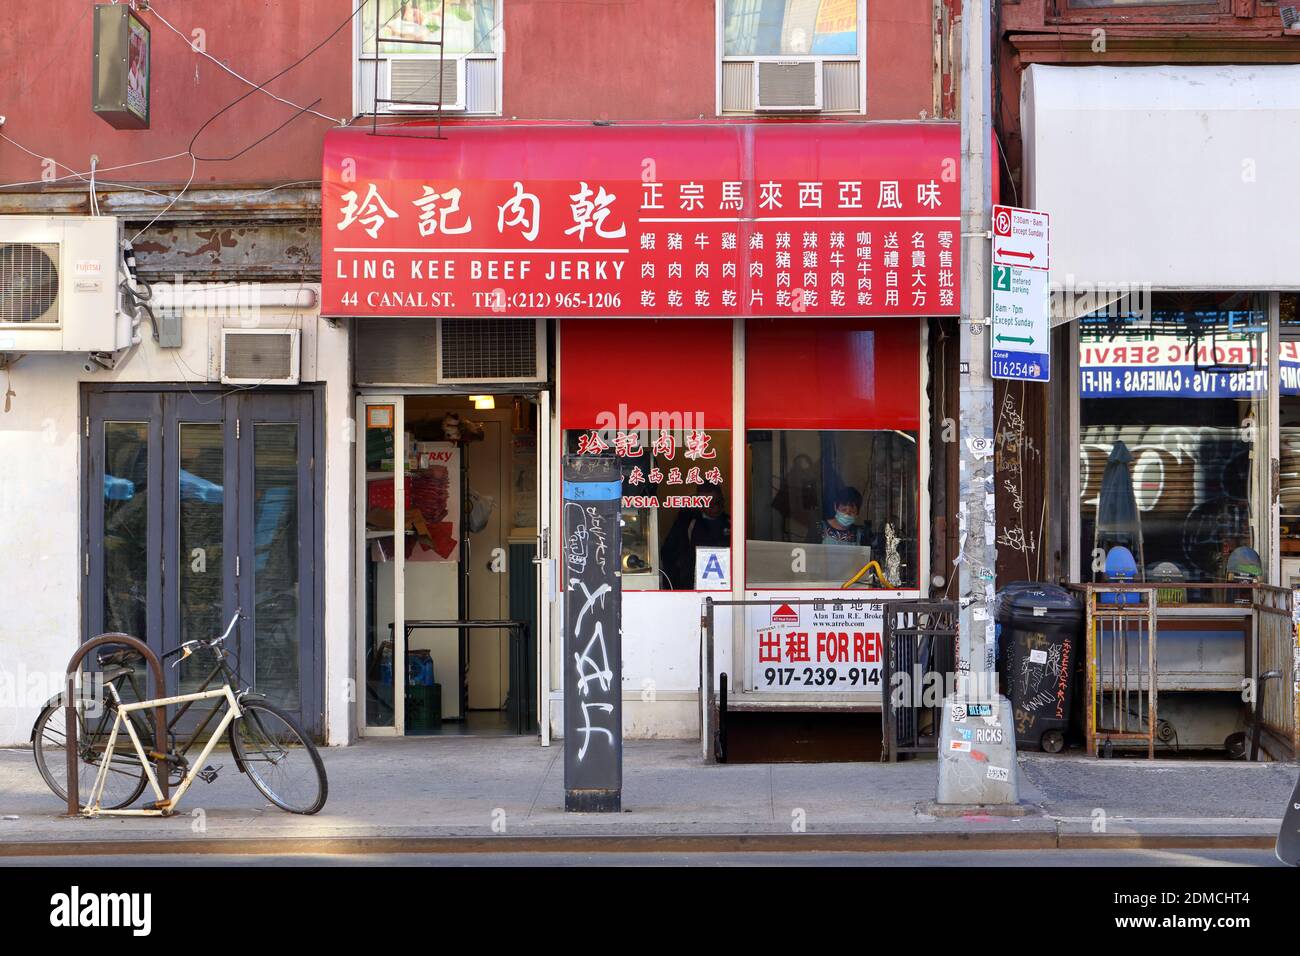 Ling Kee Beef Jerky 凌記肉乾, 44 Canal St, New York. storefront of a Malaysian style jerky shop in Manhattan's 'Dimes Square' Chinatown/Lower East Side Stock Photo